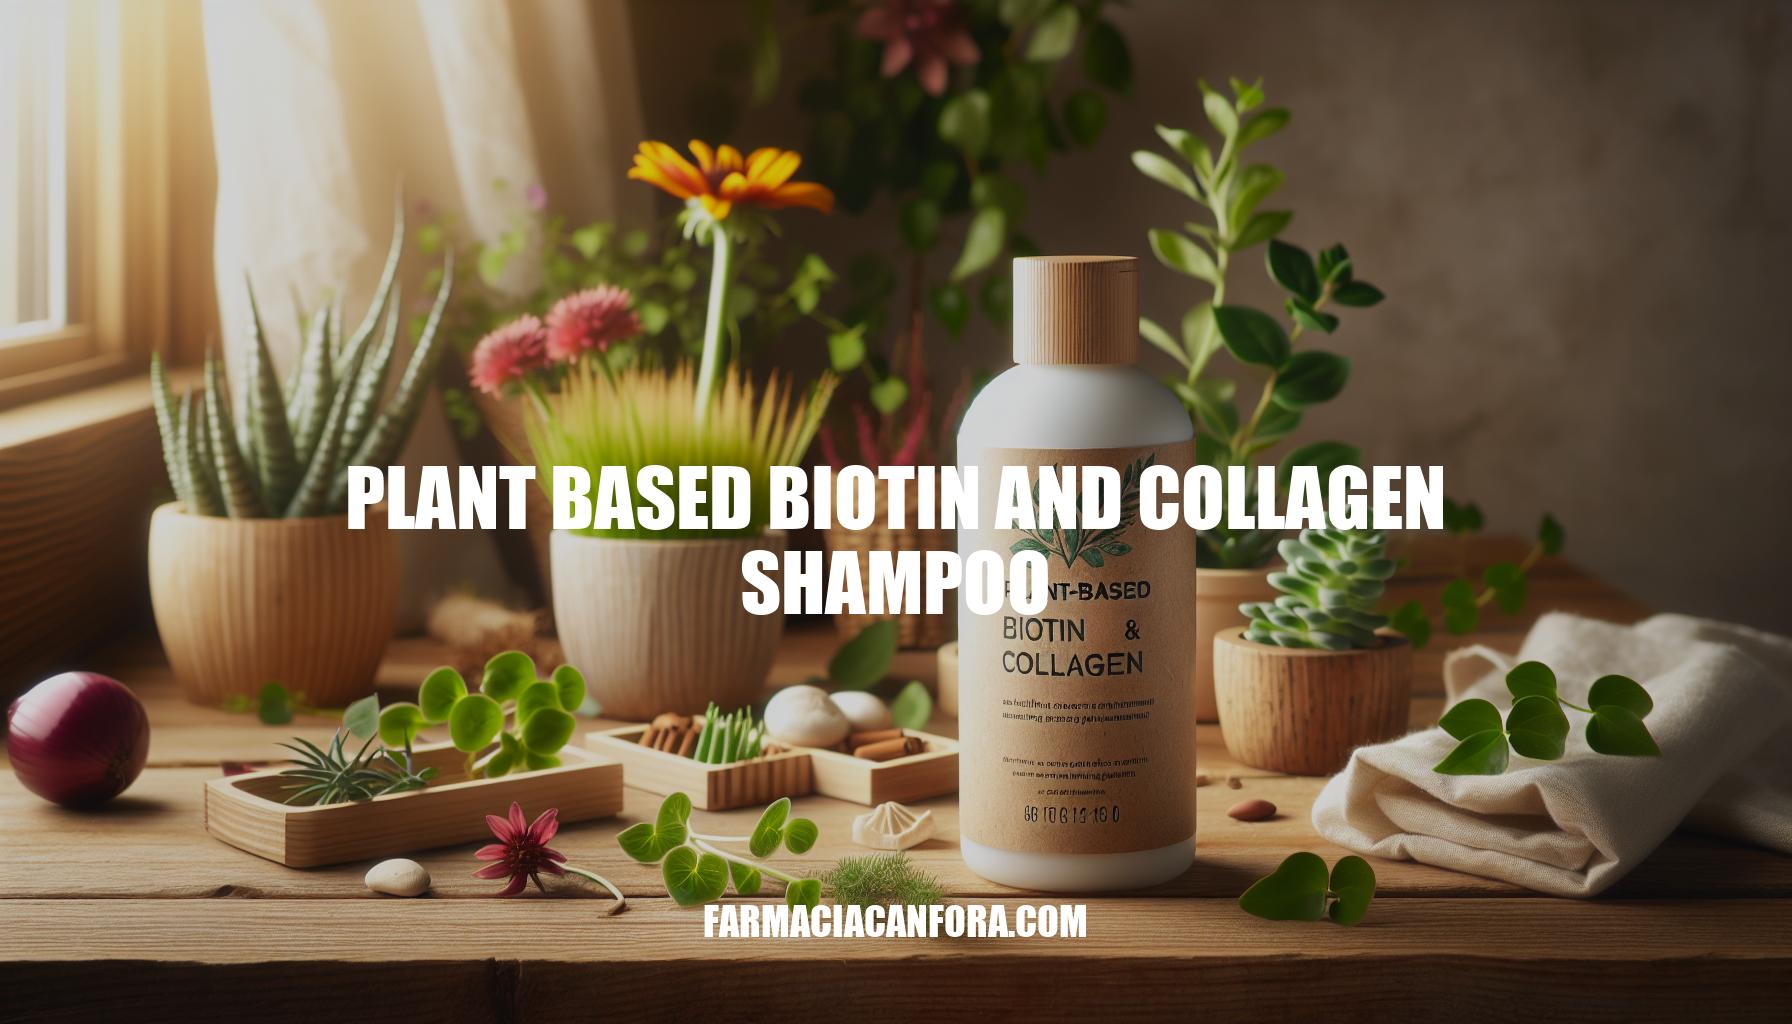 Benefits of Plant-Based Biotin and Collagen Shampoo